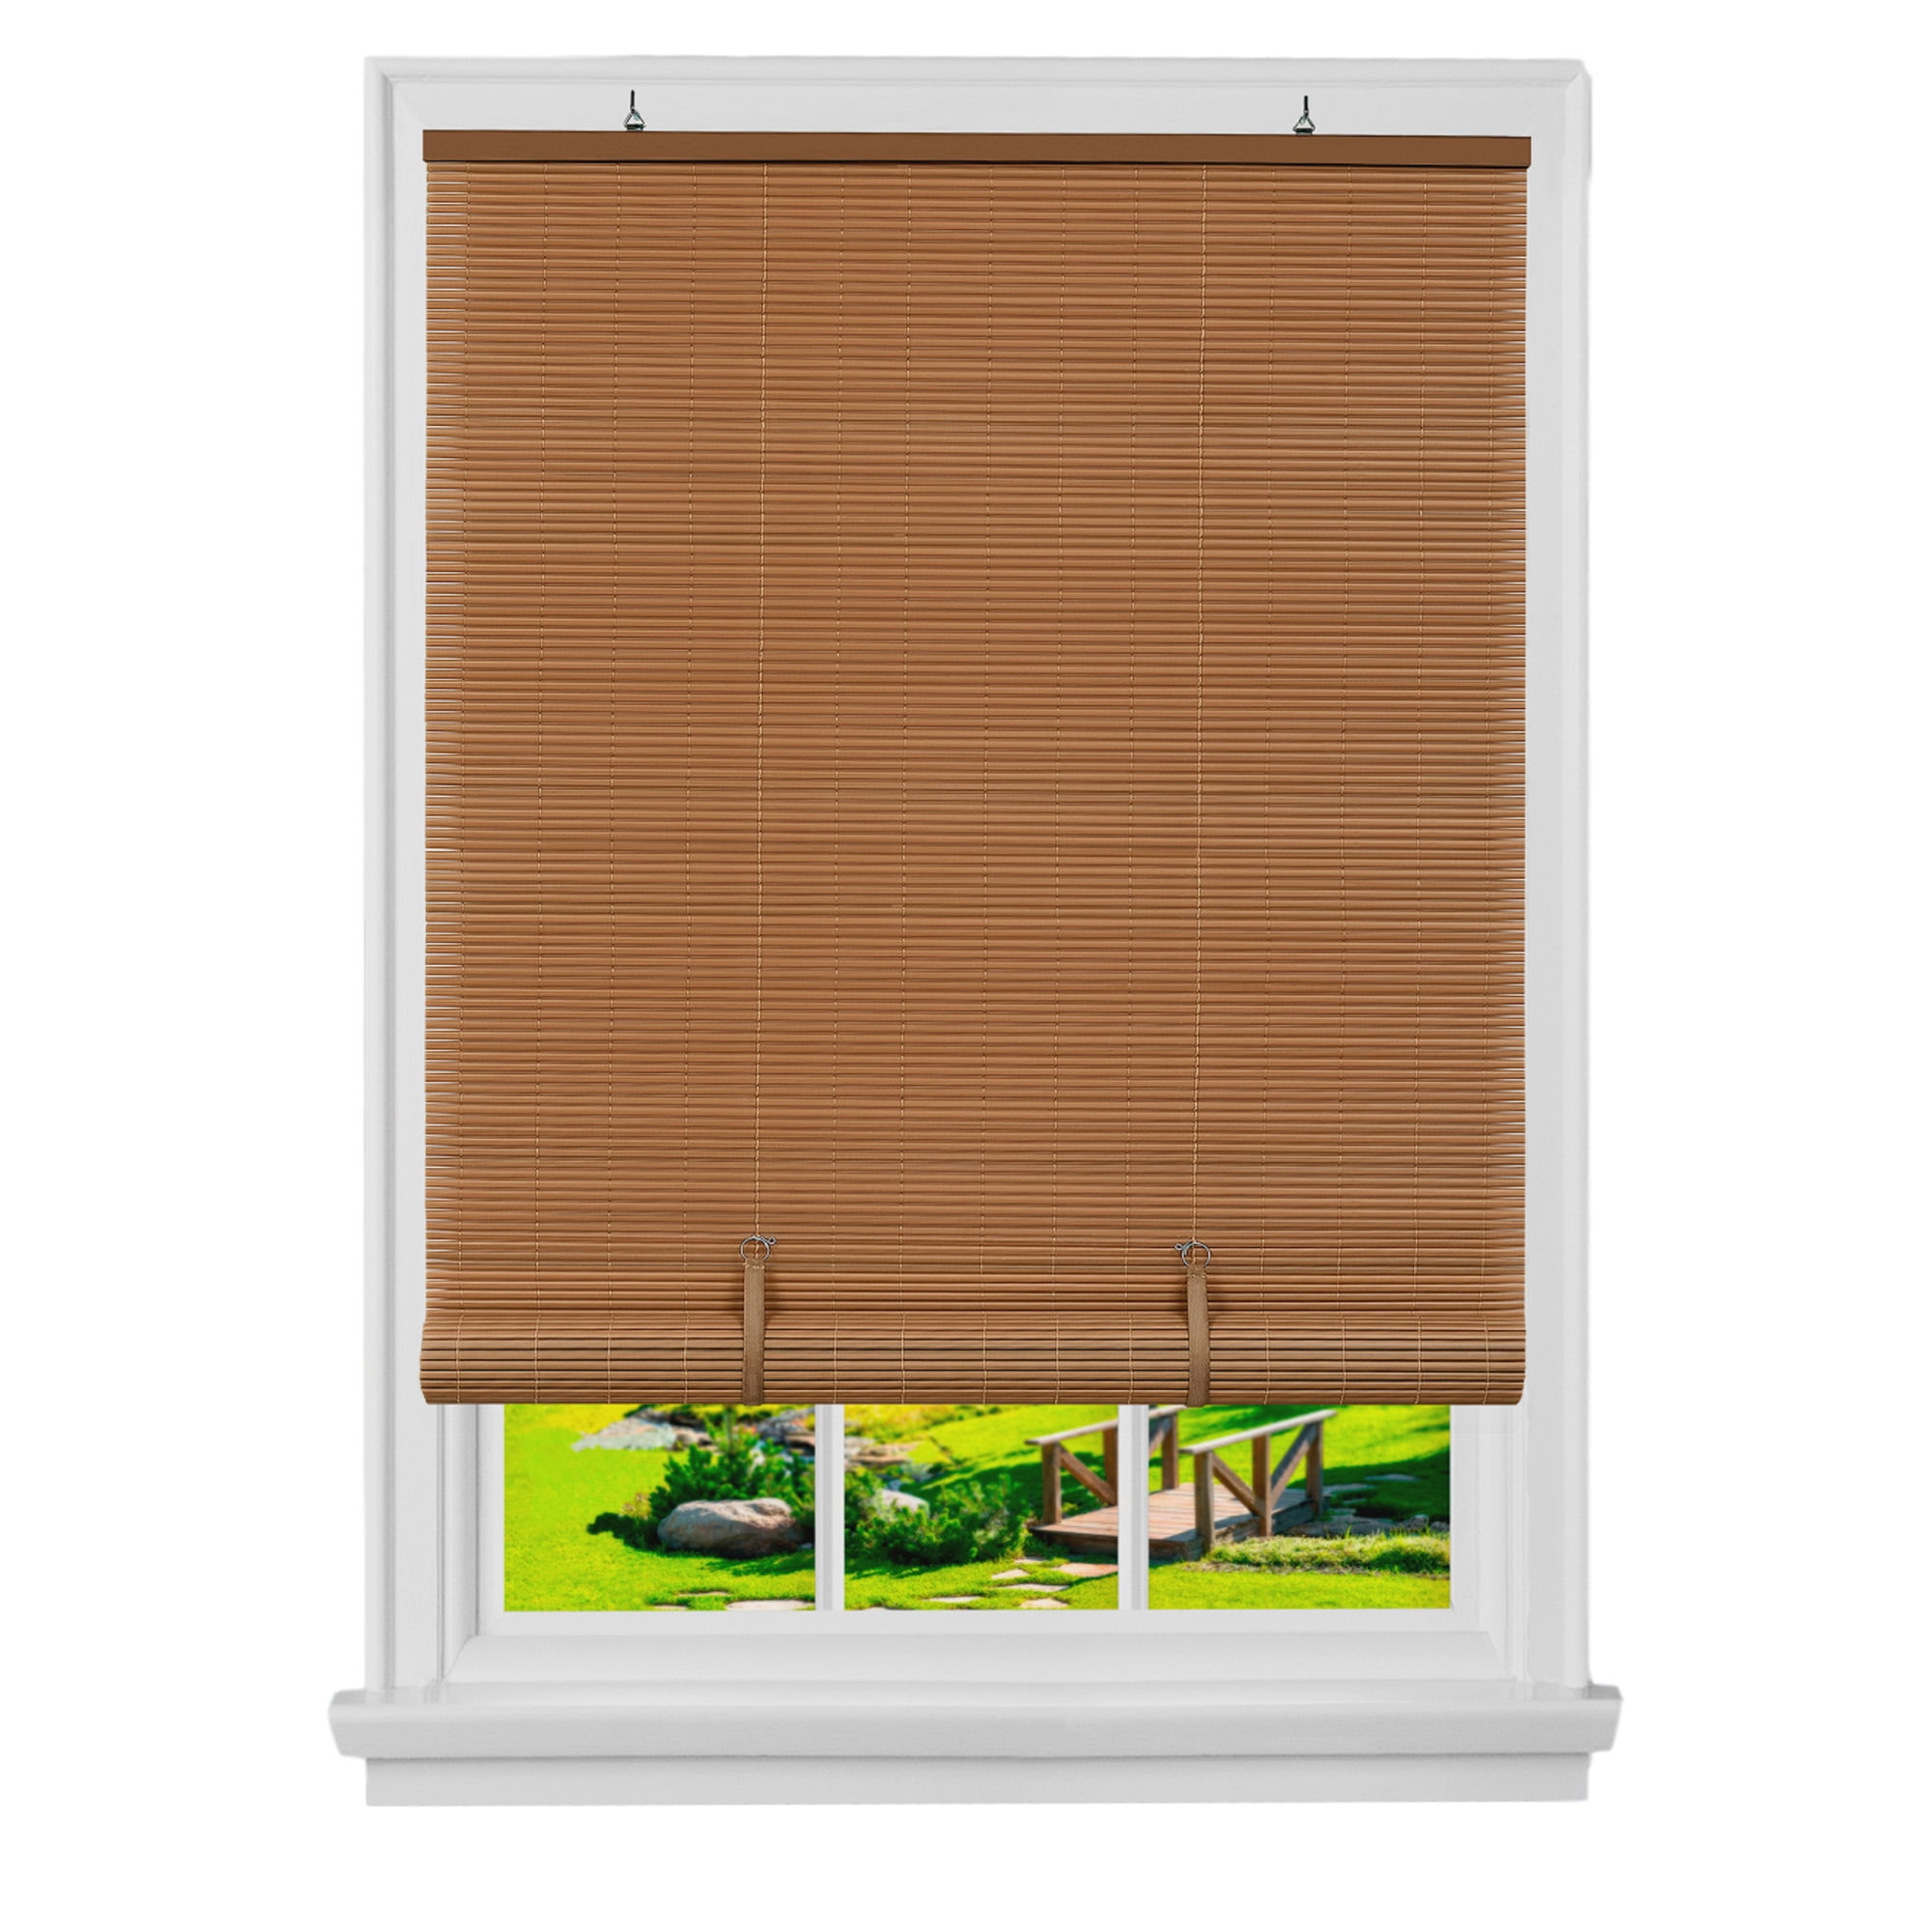 PowerSellerUSA Oval Cordless Blinds, RollUp Roman Shades for Windows